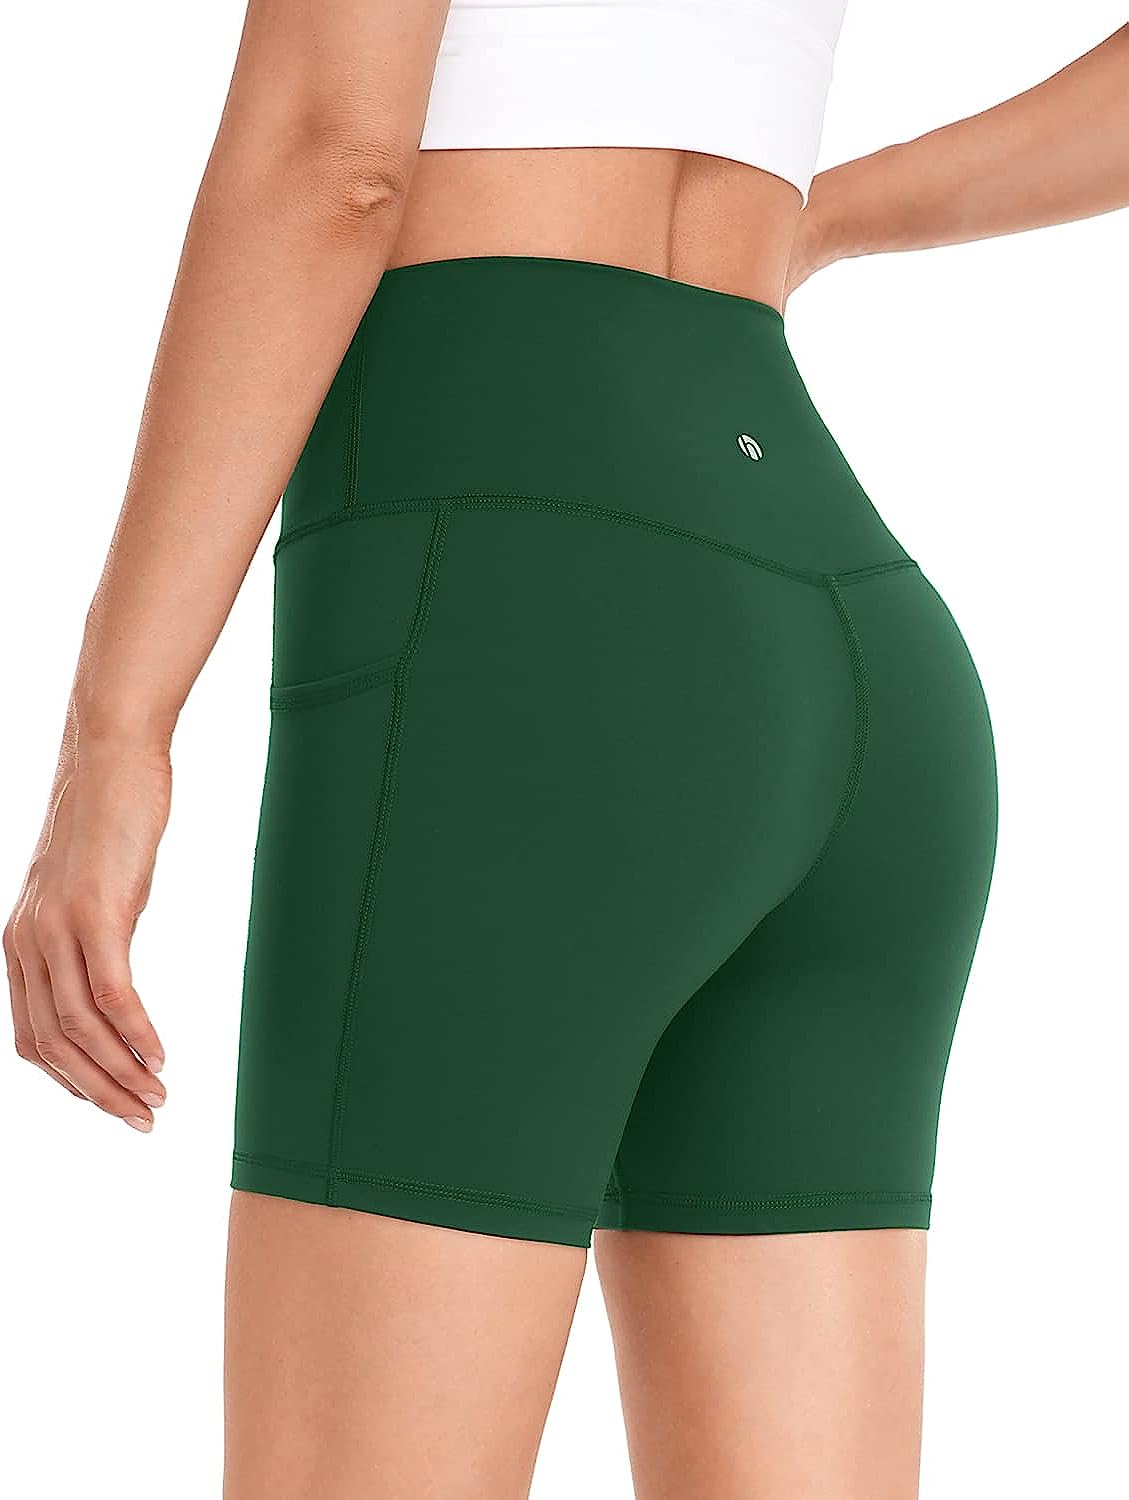 HeyNuts Essential Biker Shorts with Side Pockets for Women, High